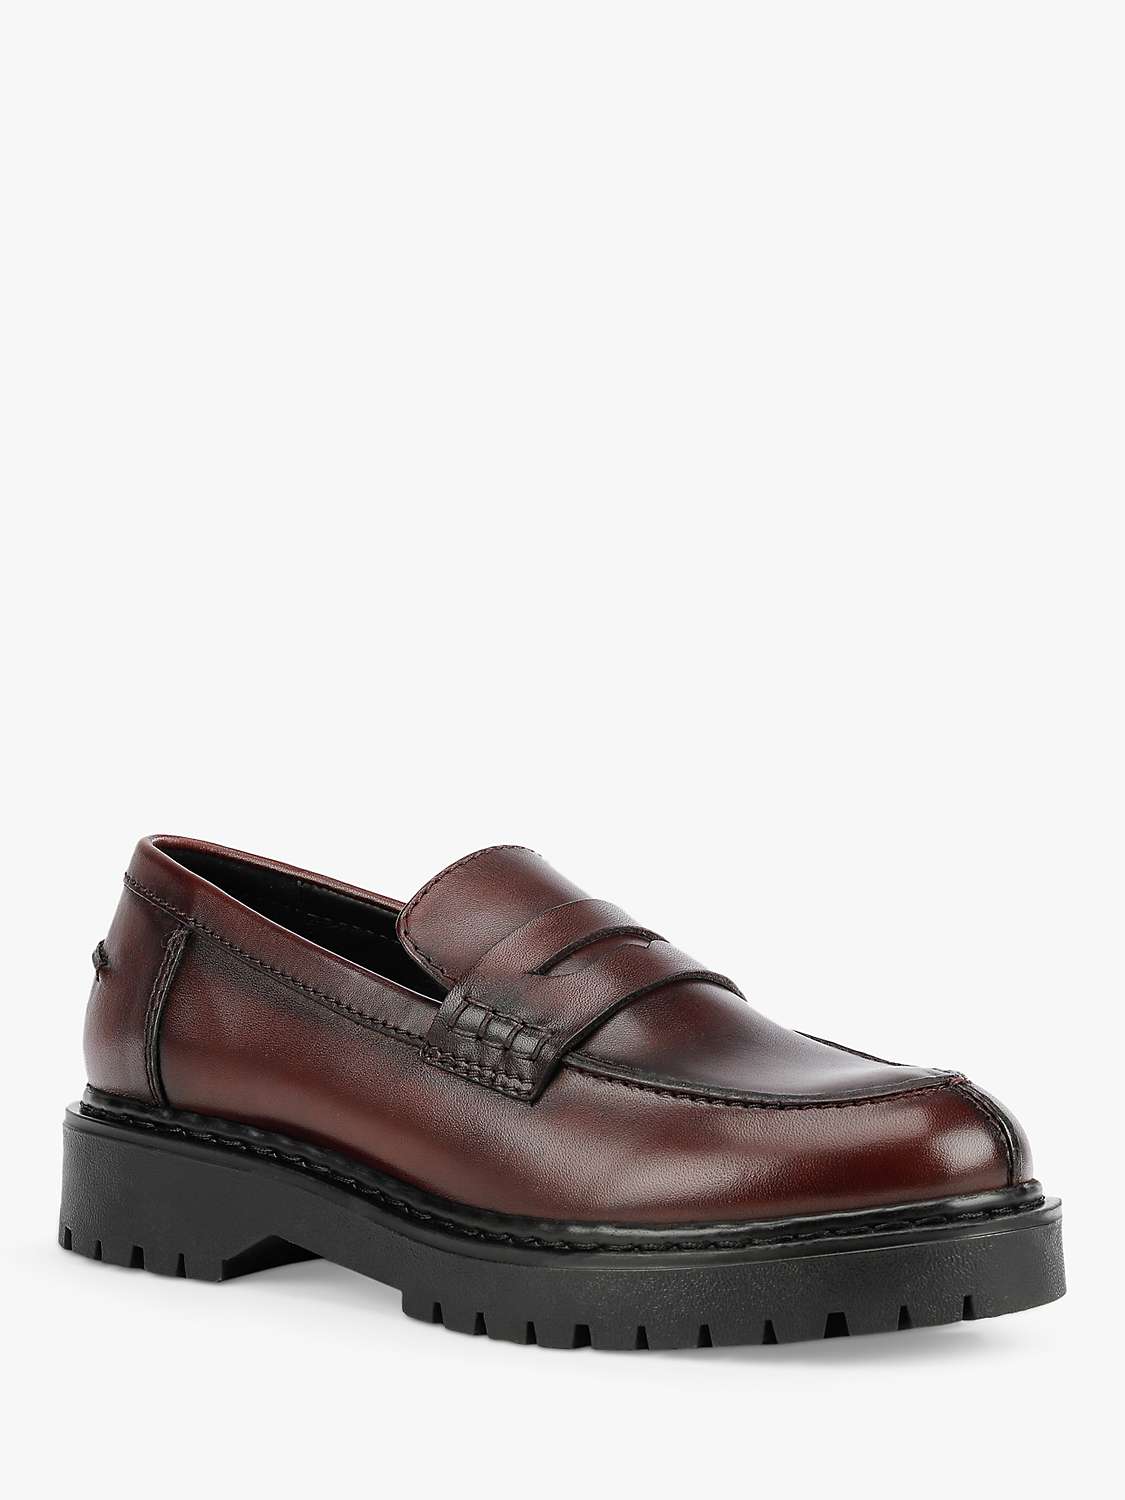 Geox Women's Bleyze Leather Loafers, Bordeaux at John Lewis & Partners